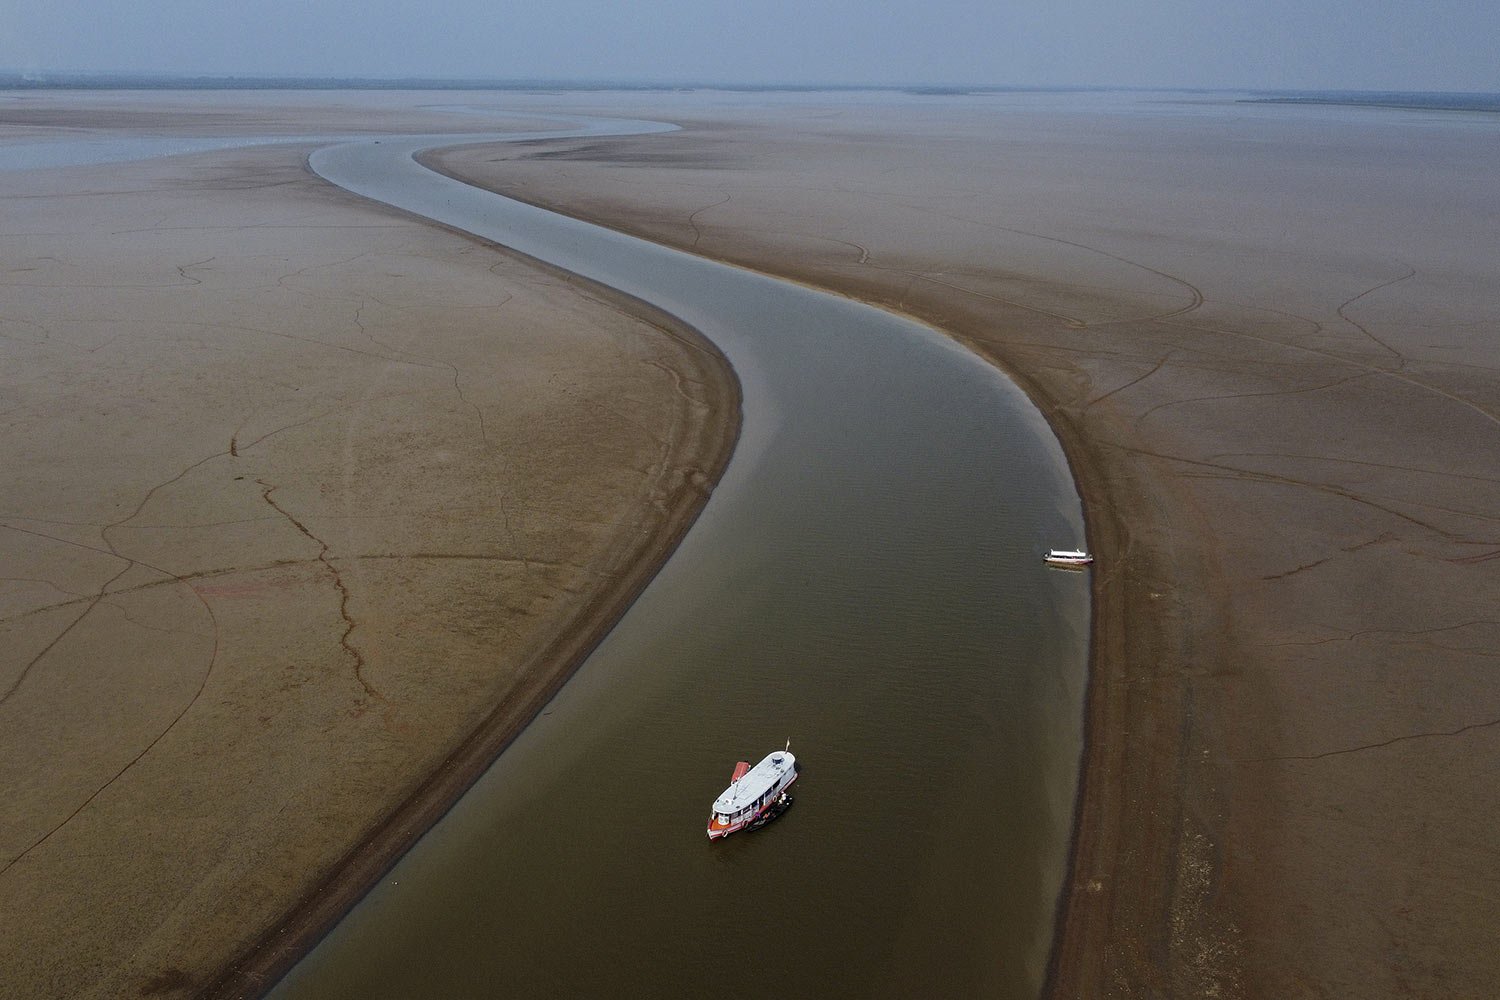  A boat navigates through a section of the Amazon River during a drought in the state of Amazonas, near Manacapuru, Brazil, Sept. 27, 2023. (AP Photo/Edmar Barros) 